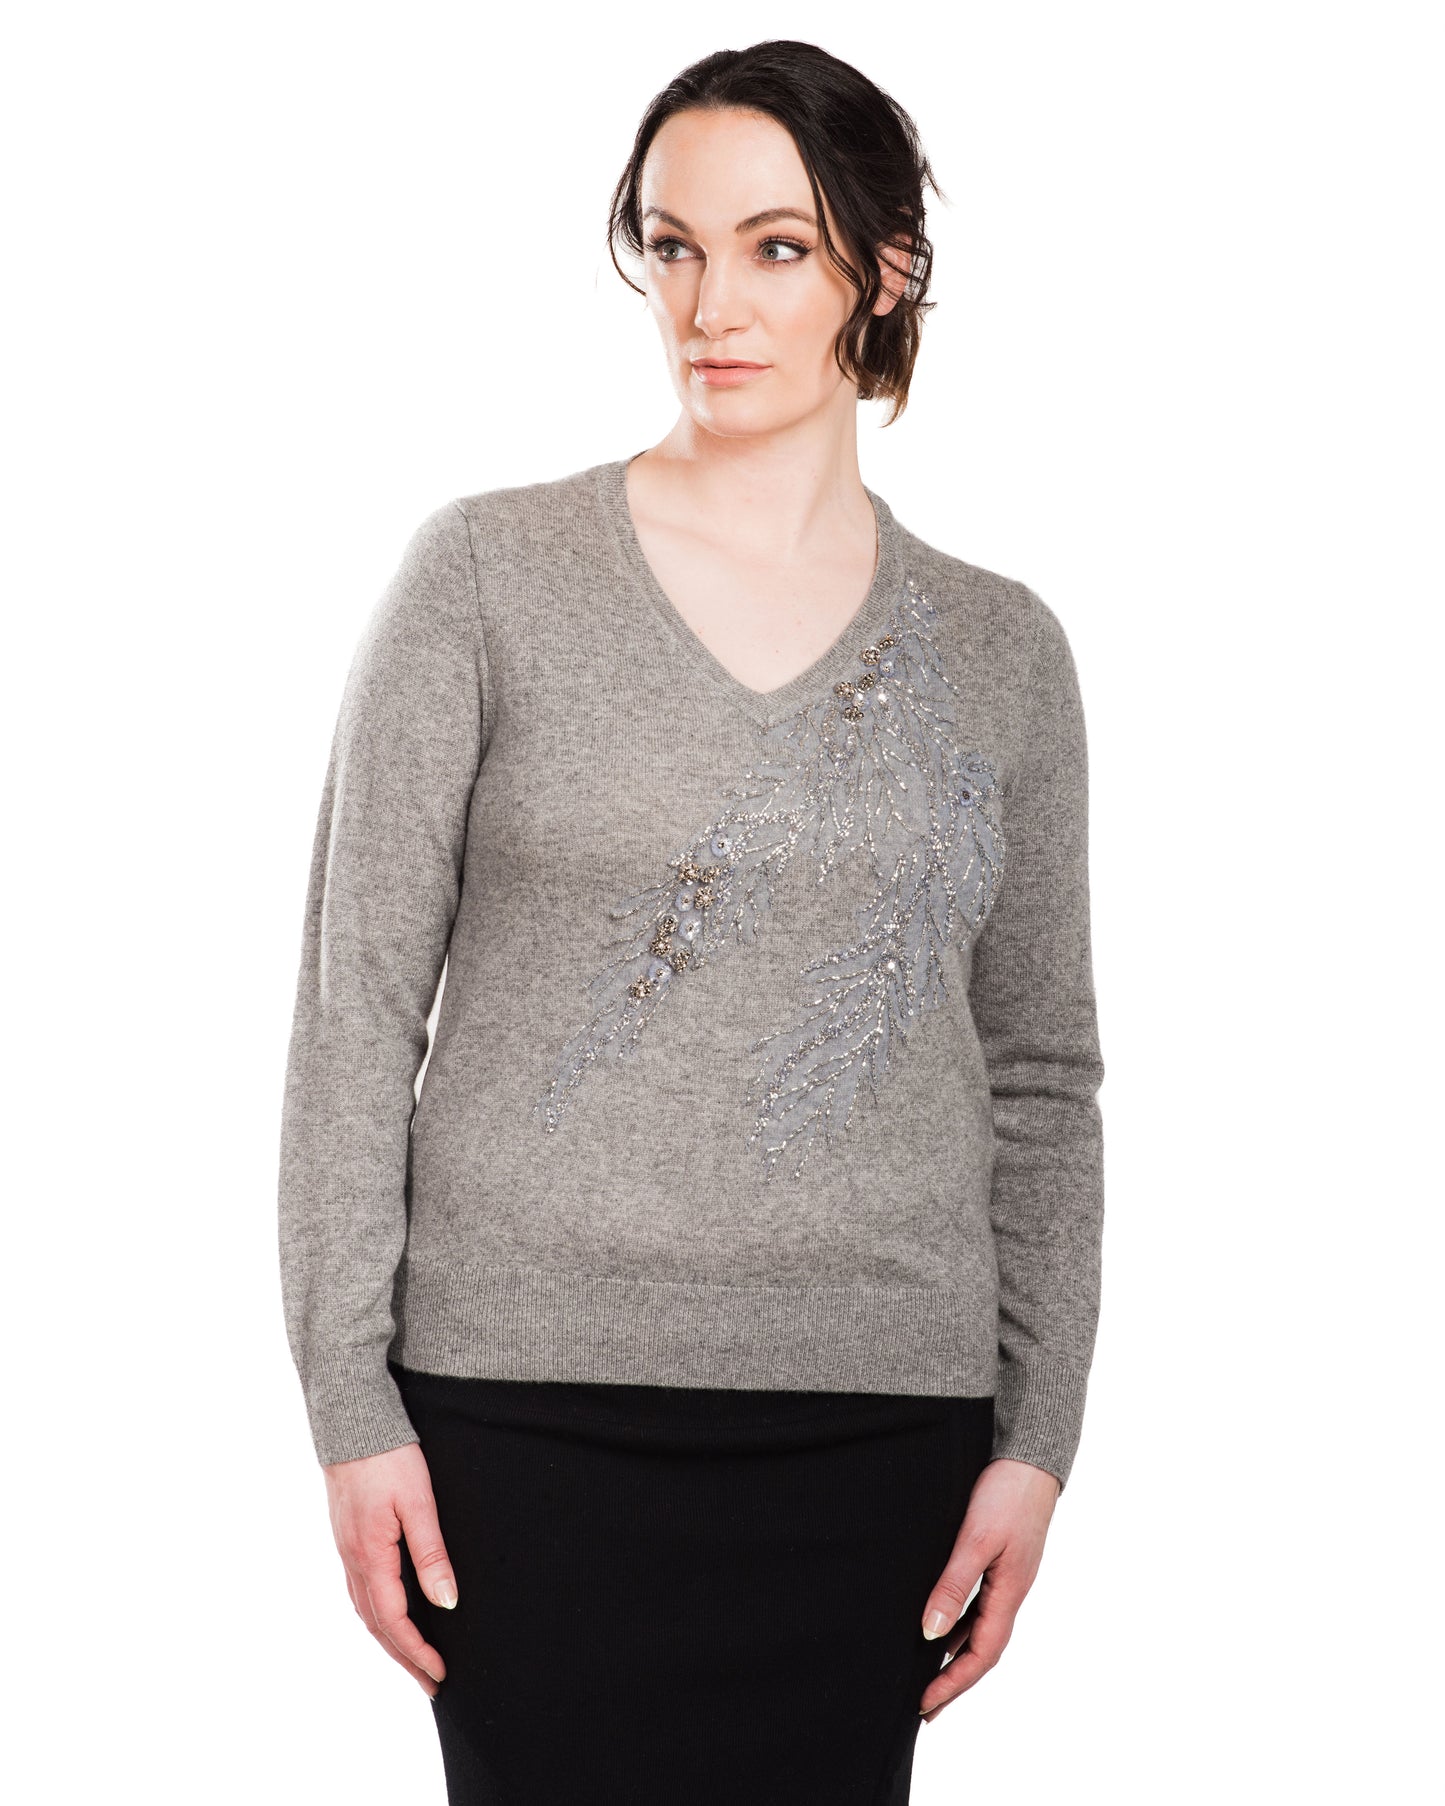 LARGE GREY V-NECK LONG SLEEVE SWEATER WITH EMBROIDERED SILVER SEQUINS AND CRYSTAL BEADED BRANCHES WITH SMOKEY GREY SILK ORGANZA BACK